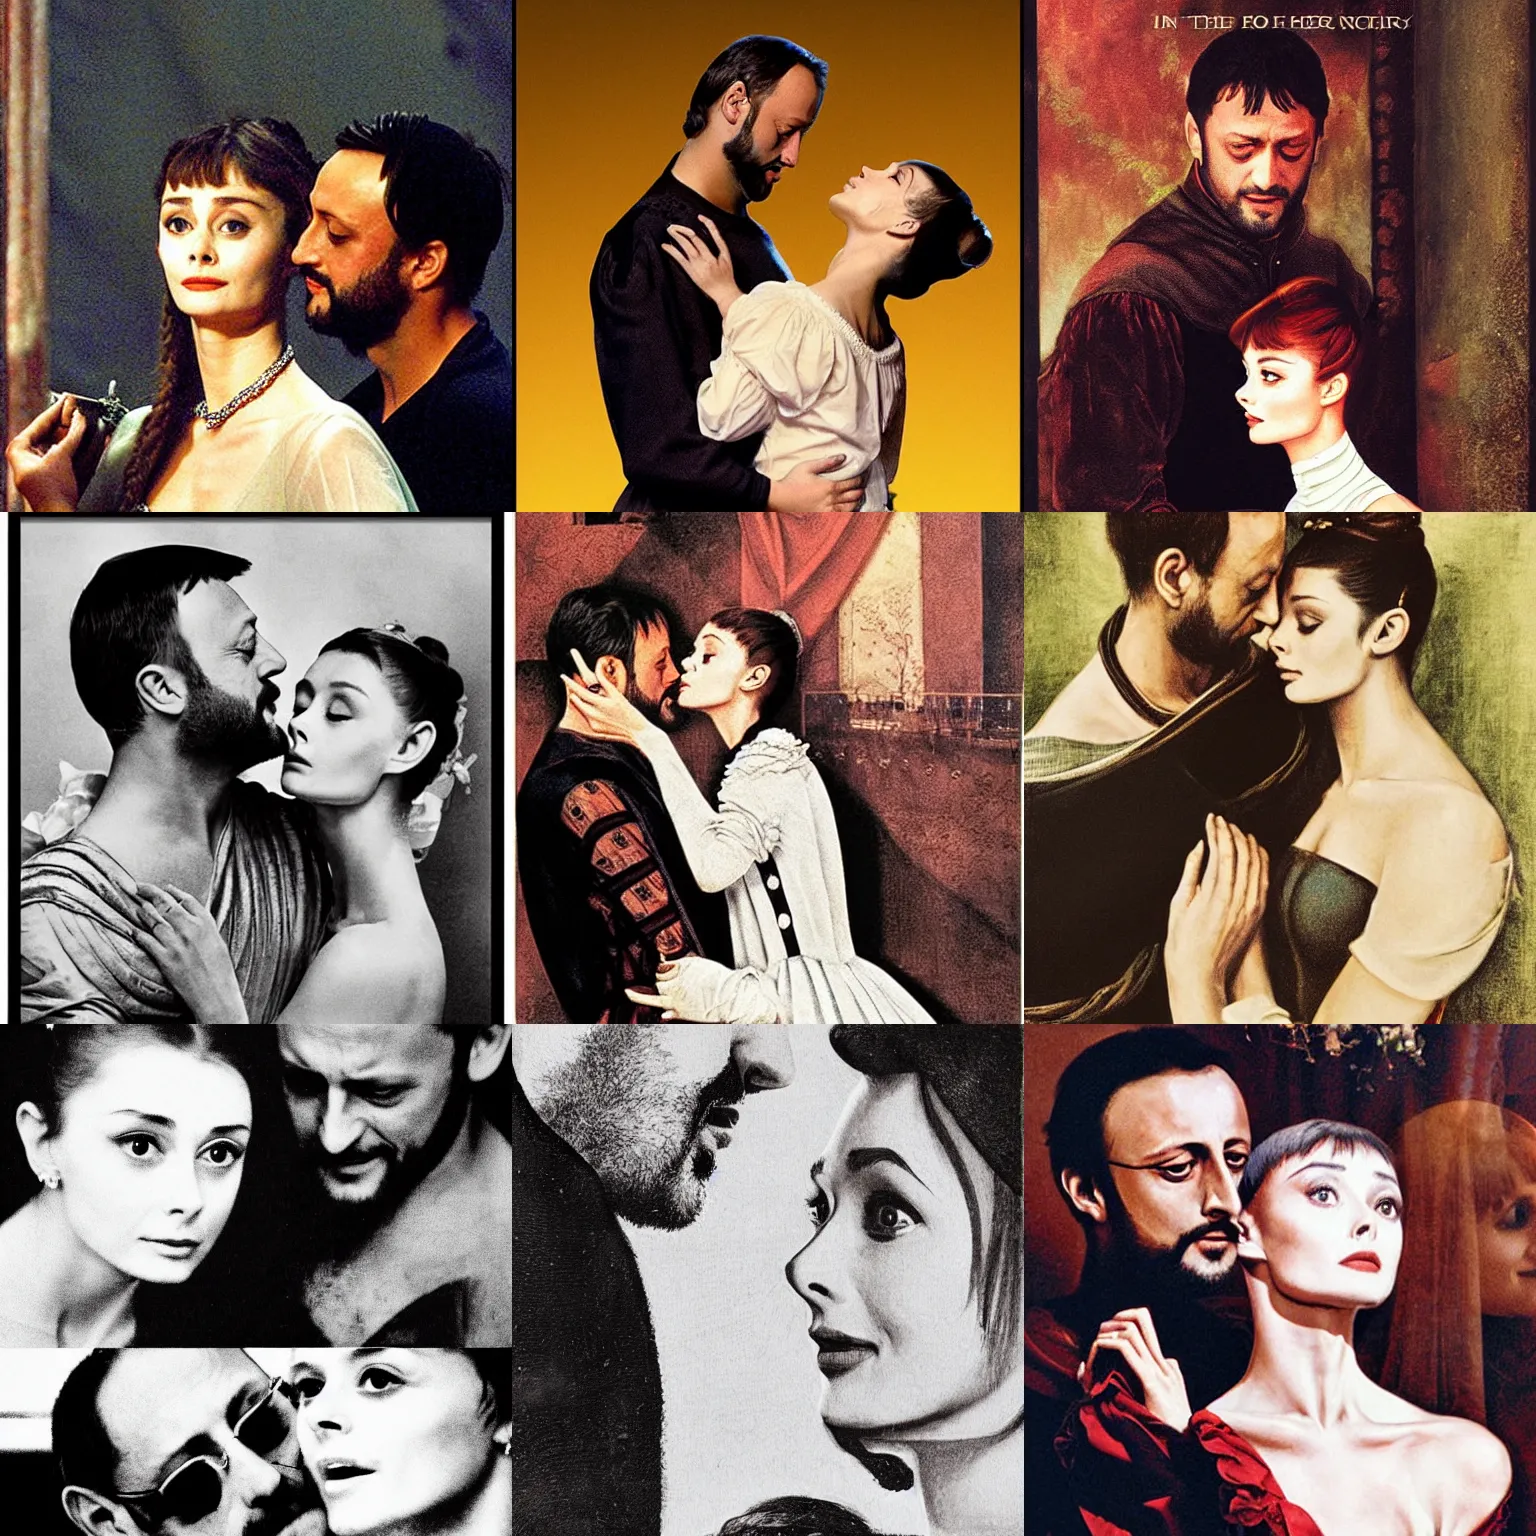 Prompt: In the 15th century Romeo (Jean Reno) and Juliet (Audrey Hepburn), are looking at each other romantically. tragic, ((restrained)), lumnious, stage lights, 18th theater poster by Frank Dicksee